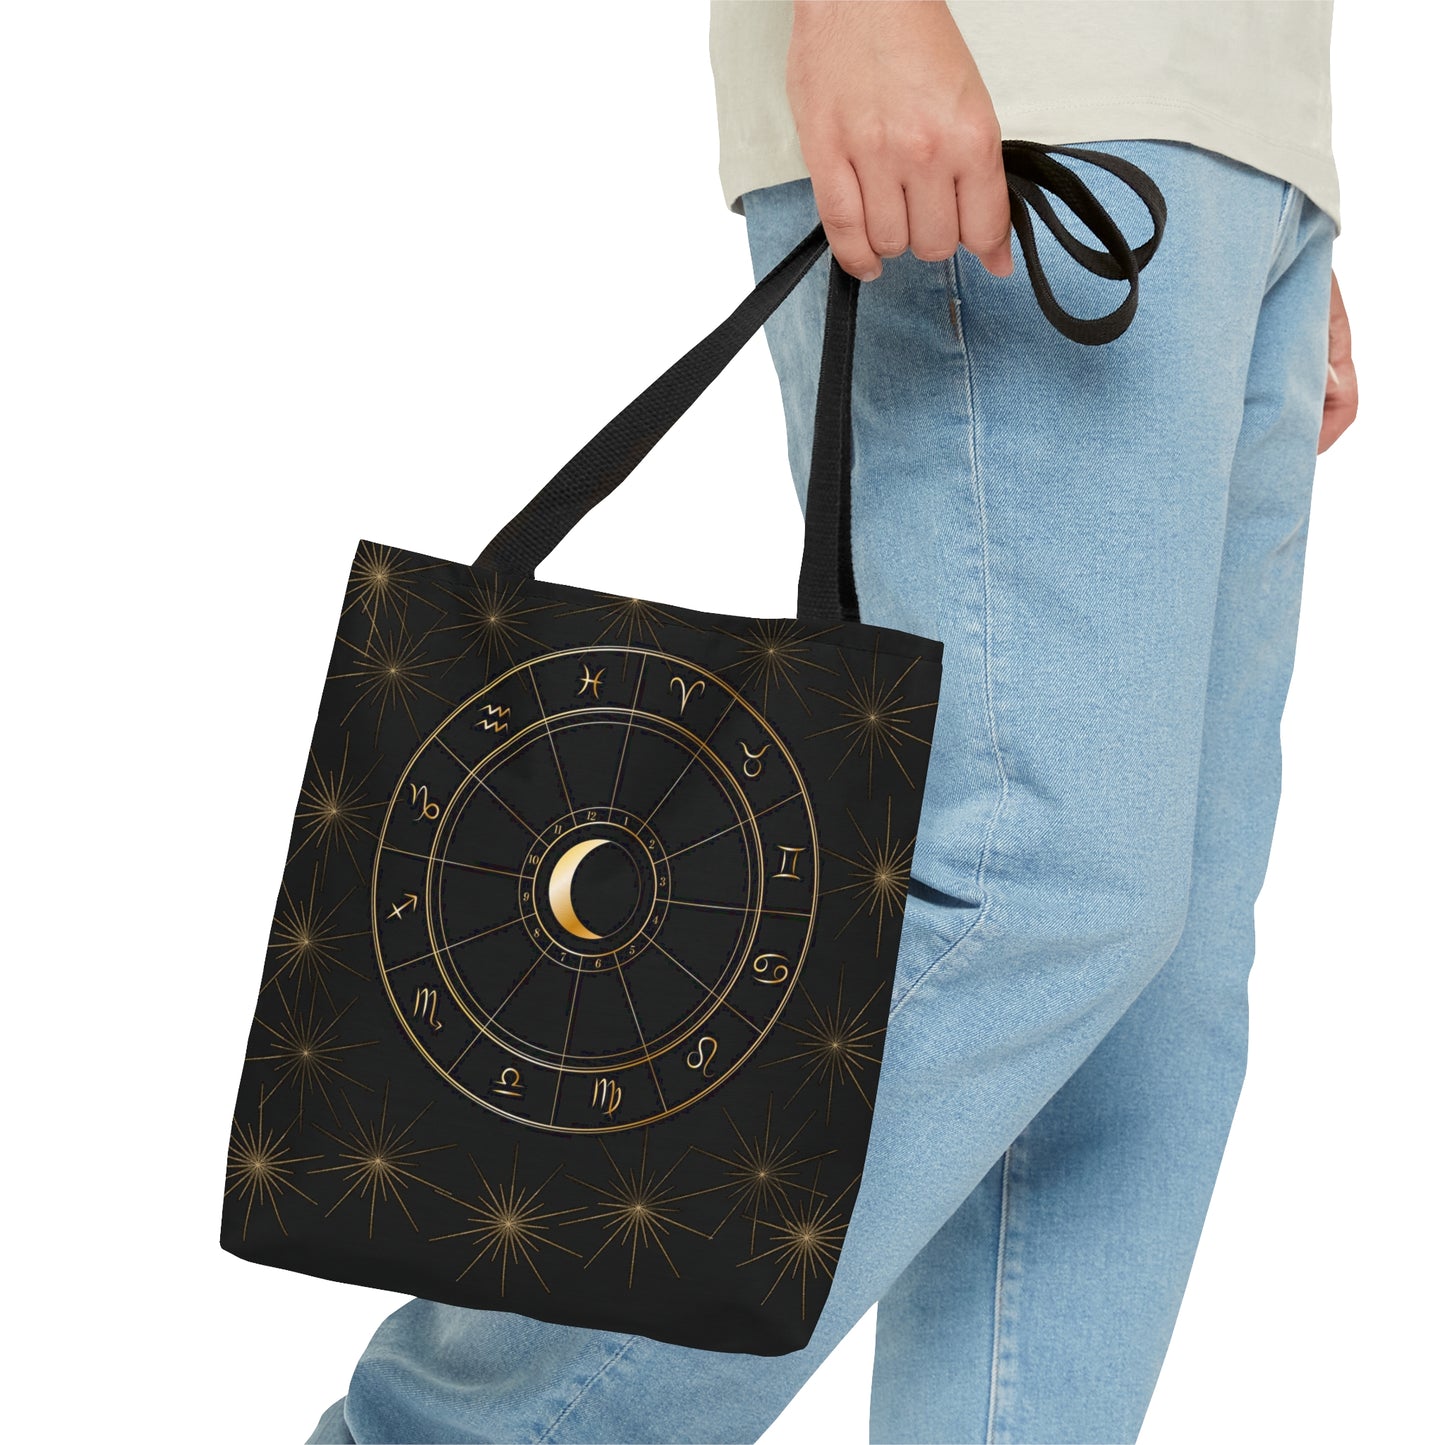 Celestial Sun Moon and Astrology Chart Tote Bag